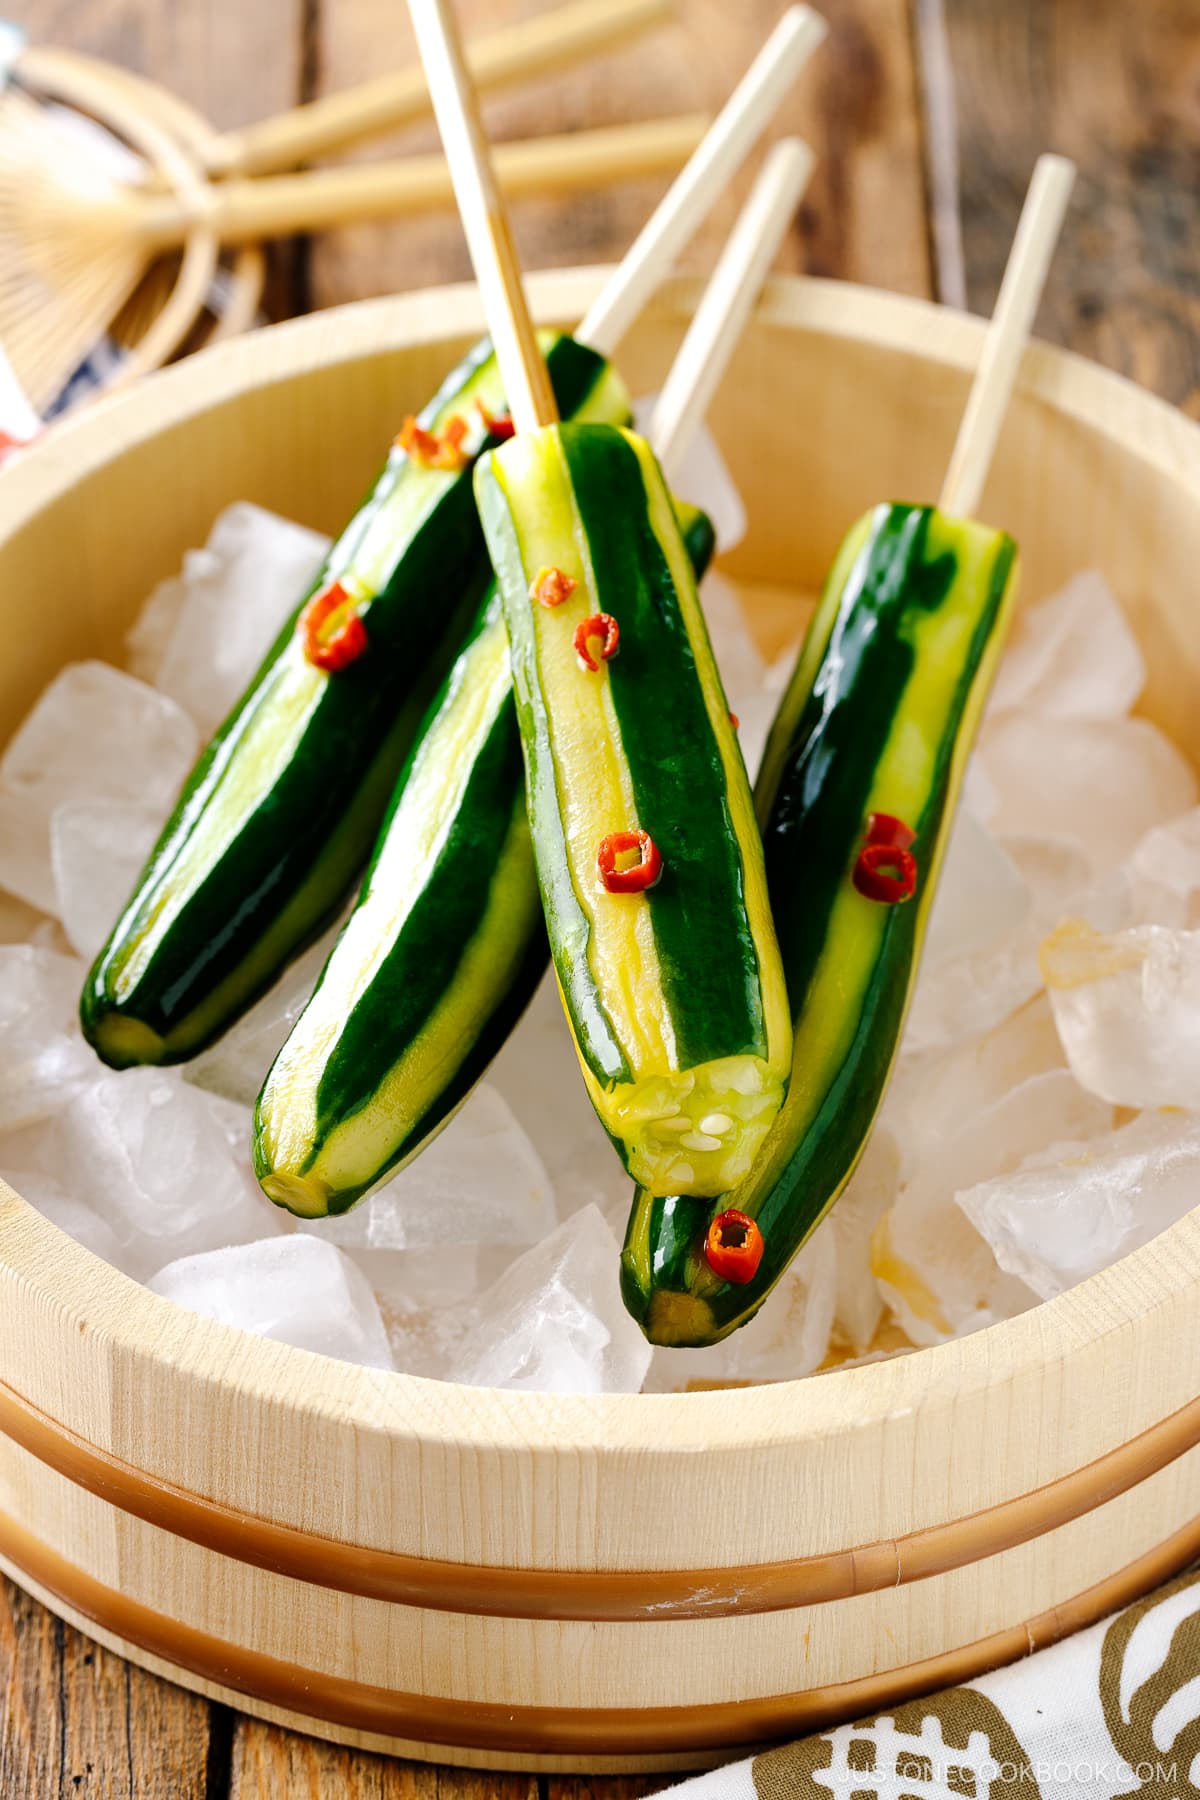 Japanese Cucumbers on a Stick served over iced cubes in wooden bowl.